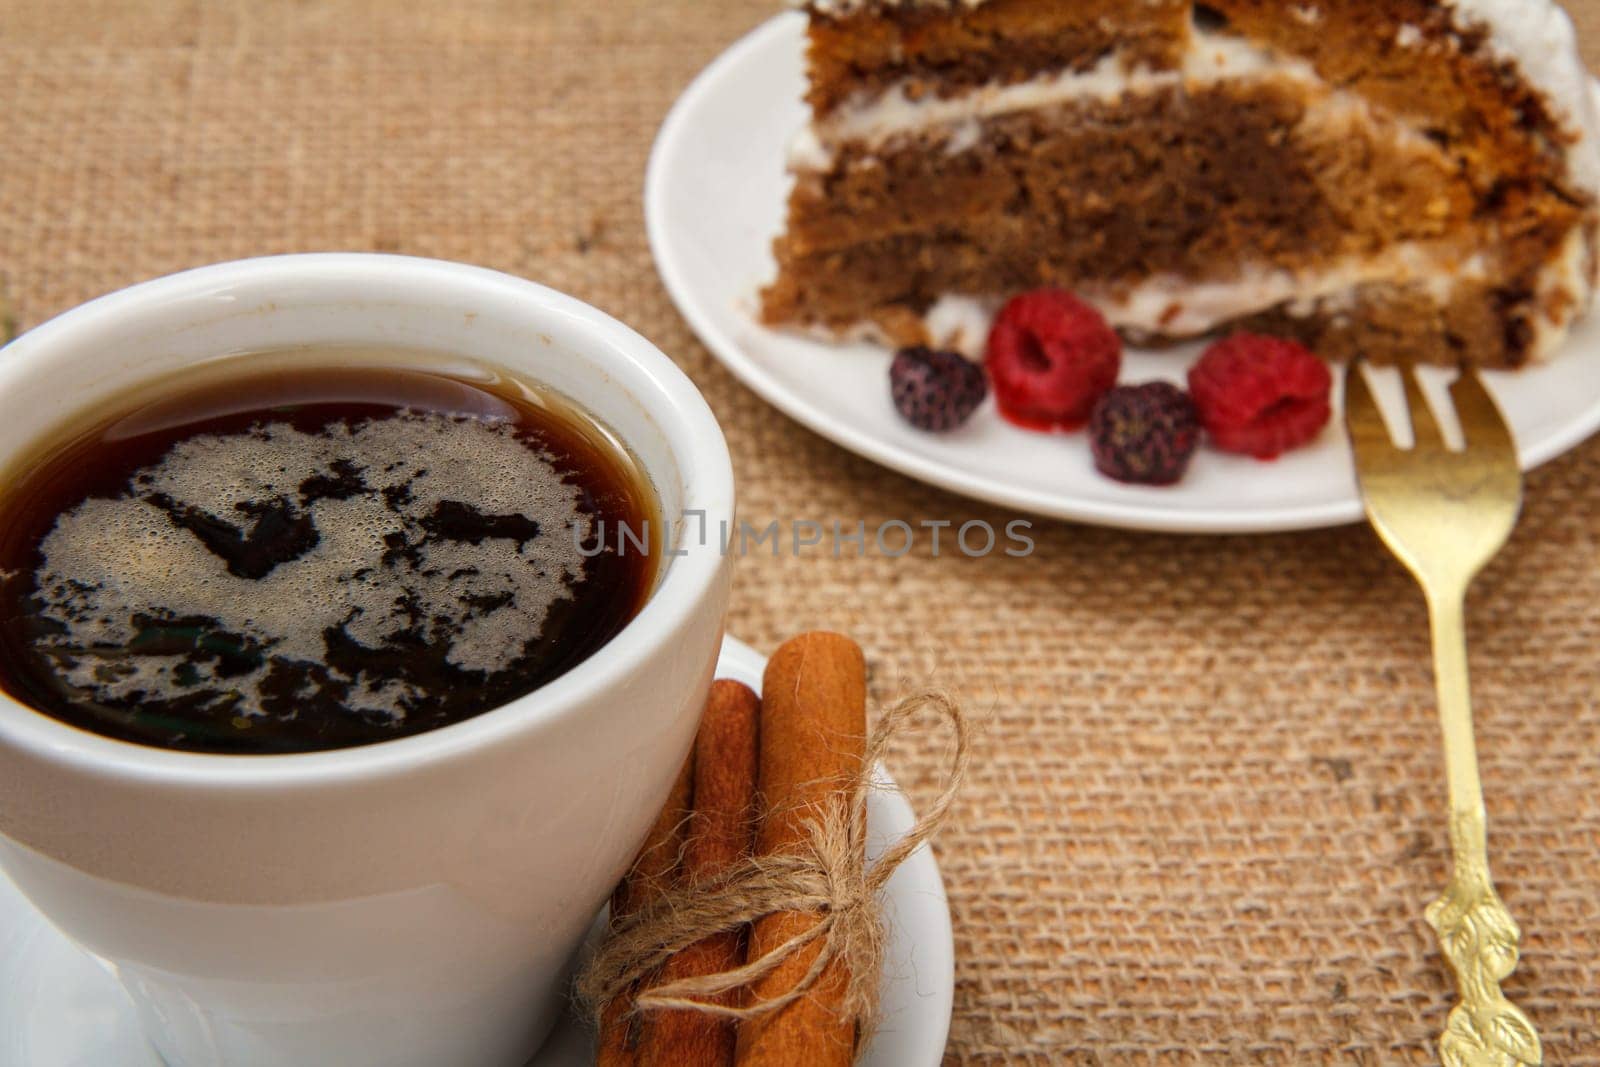 Cup of coffee, cinnamon, fork and slice of biscuit cake decorated with whipped cream and raspberries on table with sackcloth.